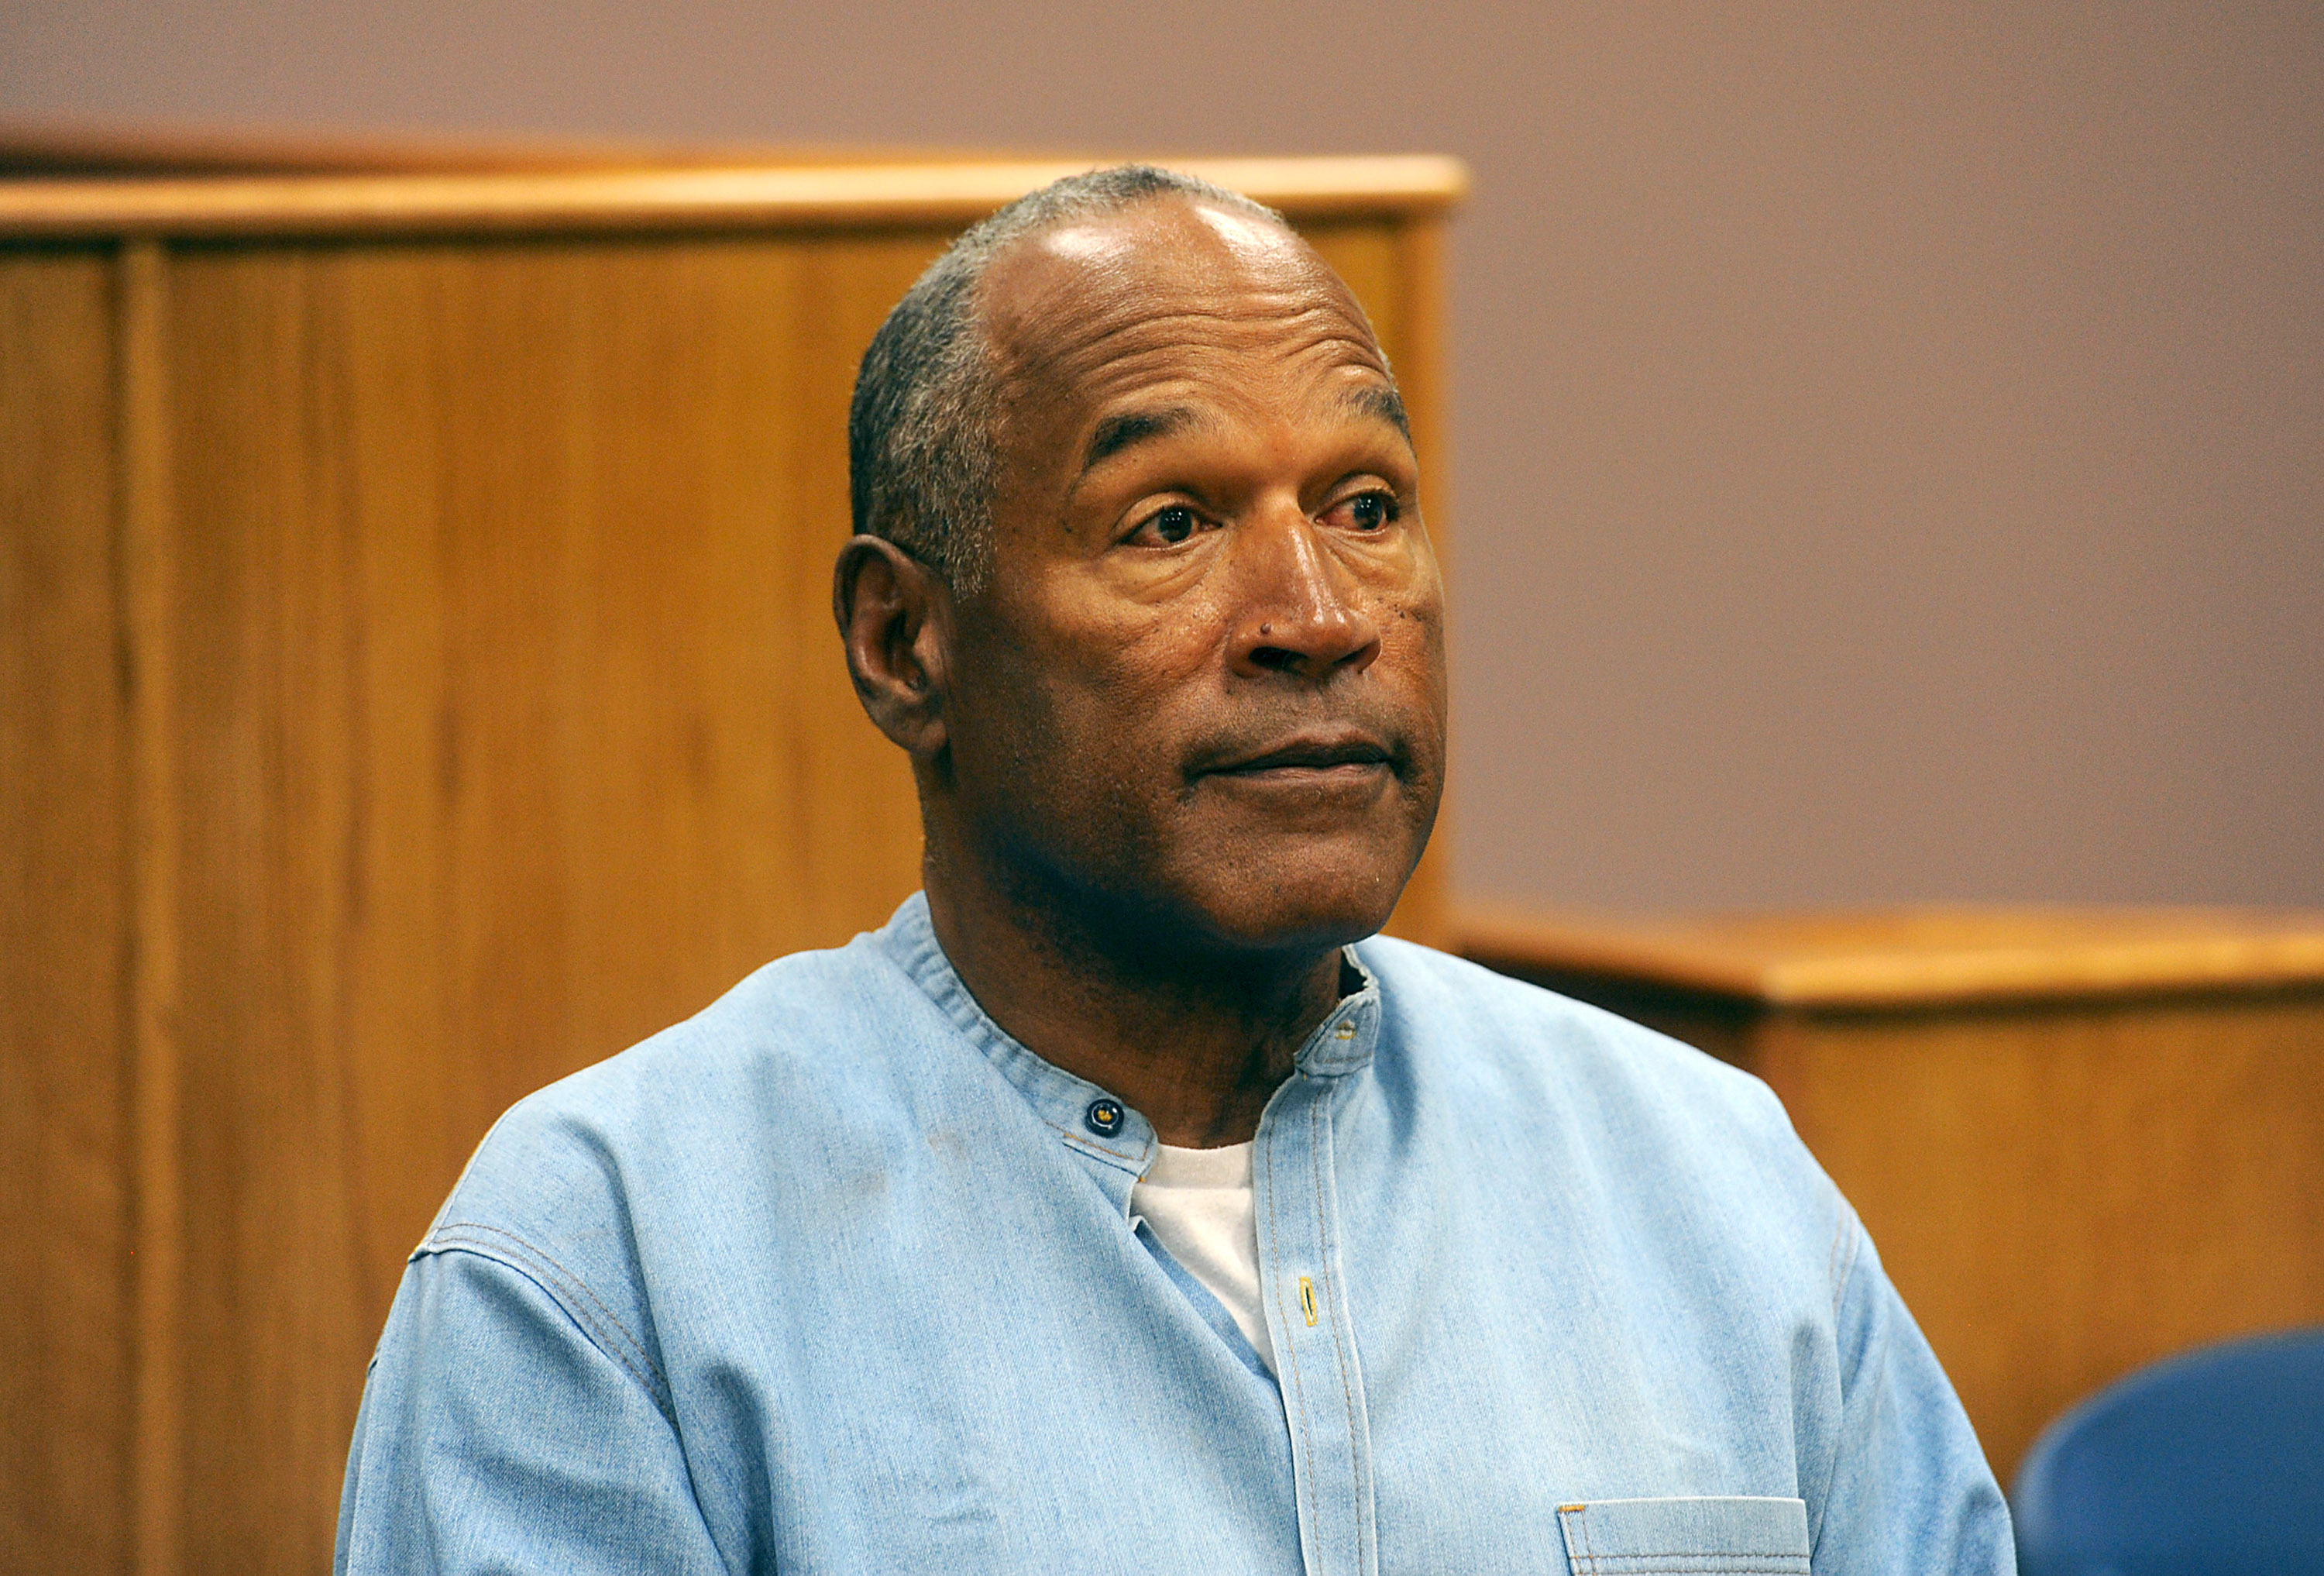 O.J. Simpson attends his parole hearing at Lovelock Correctional Centre